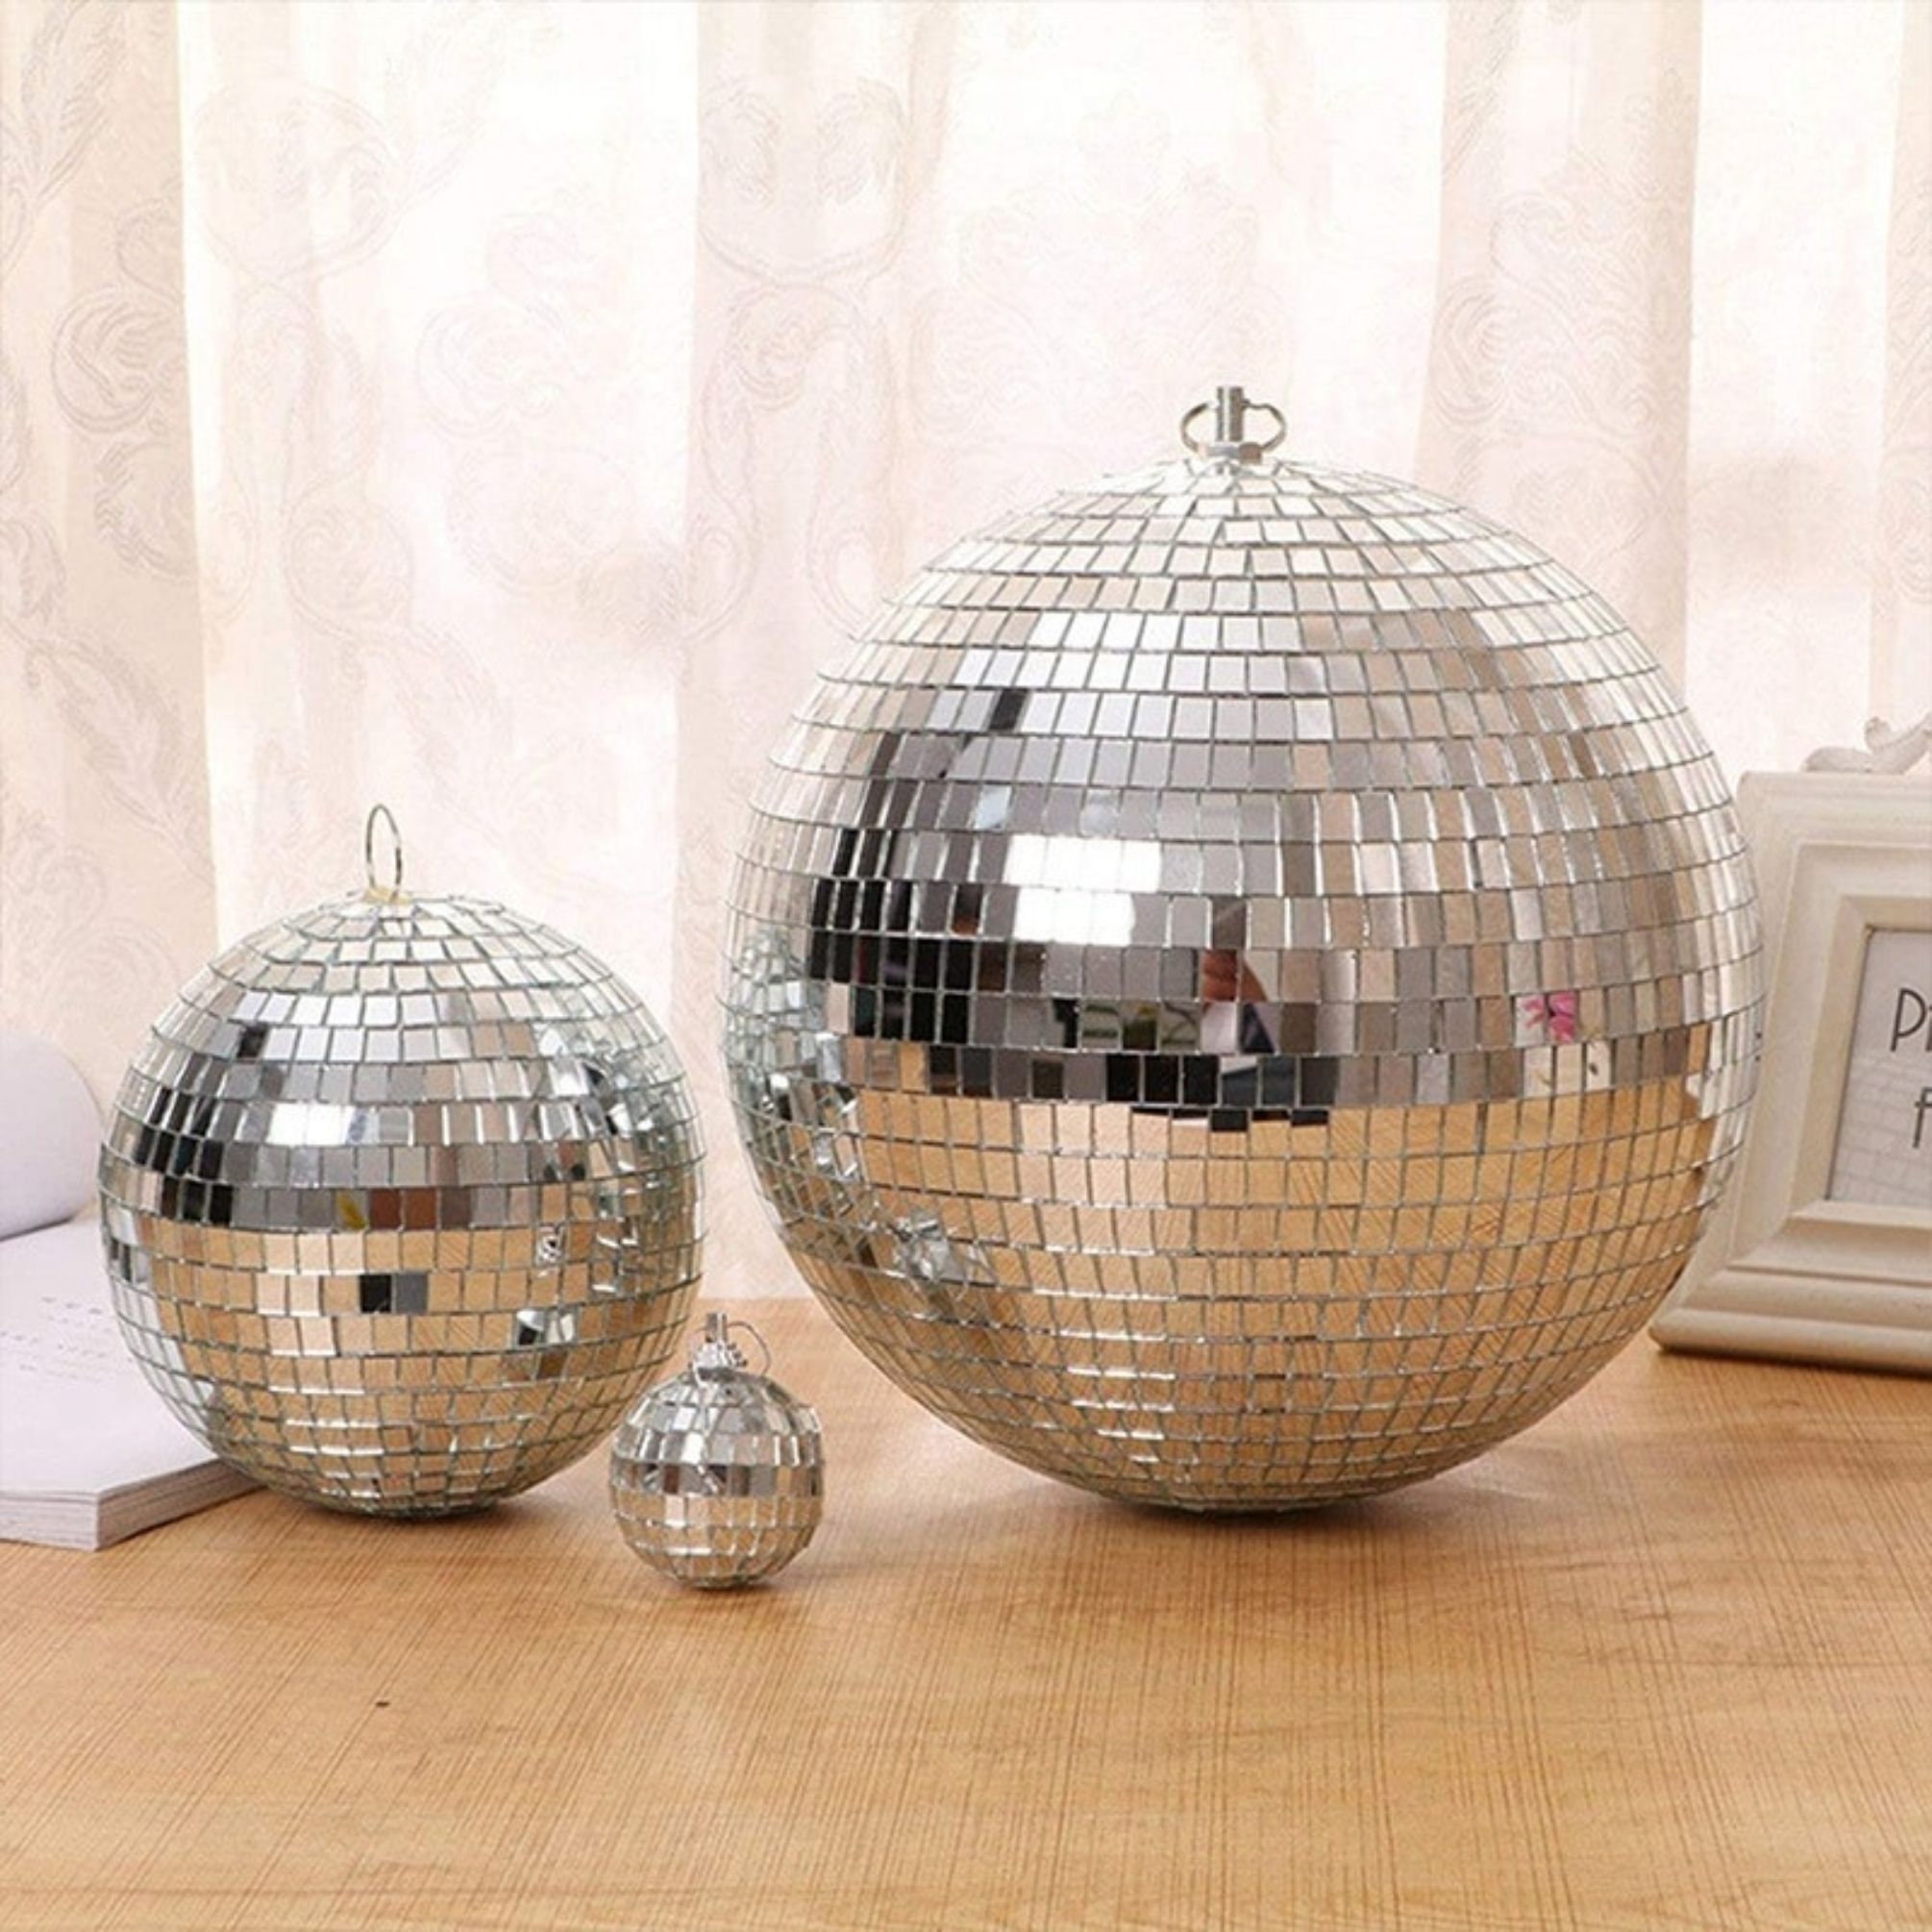 Mirror Ball Family Gathering Live Stage 8 inch Reflective Light Dance Disco Balls with Hanging Ring for DJ Club Party,Home Decoration 8 inch, Blue 